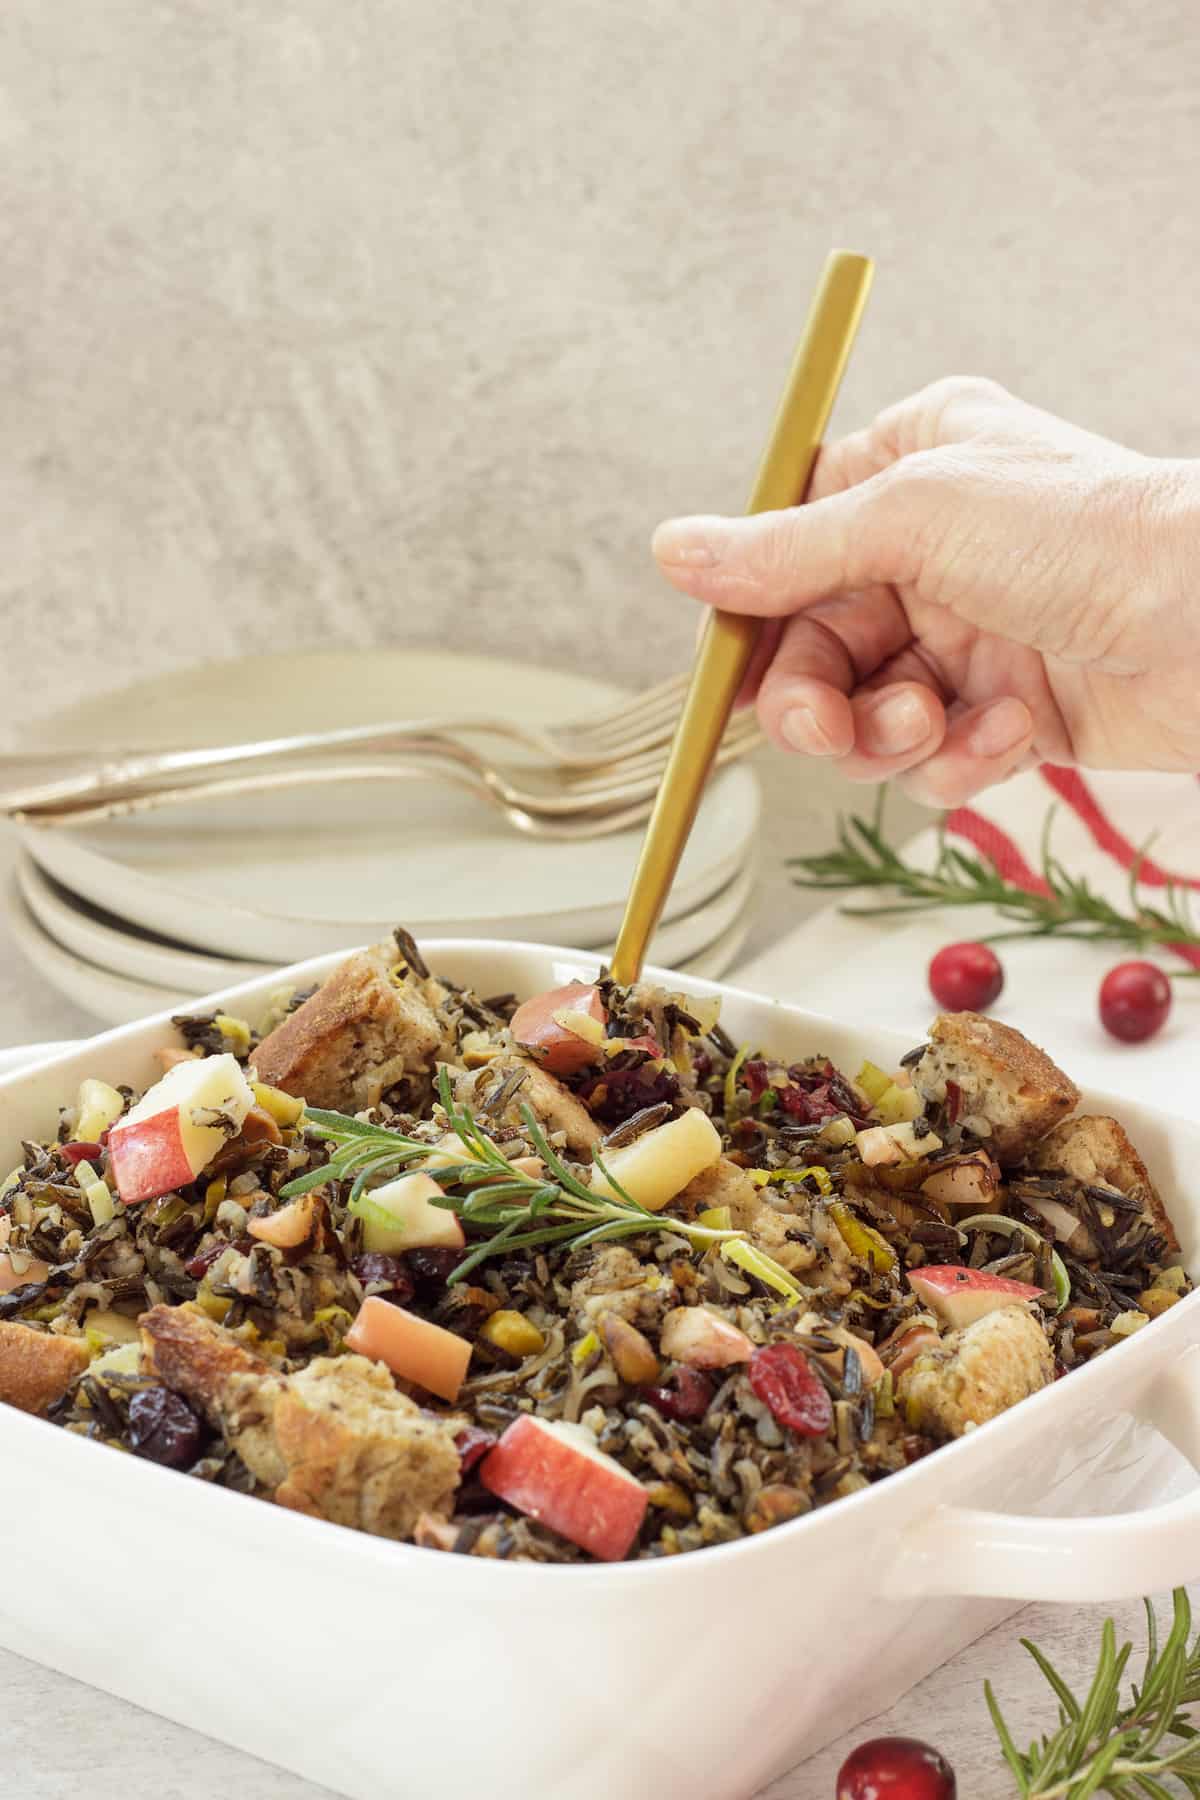 A person holding a gold spoon scooping wild rice stuffing casserole from a white casserole dish